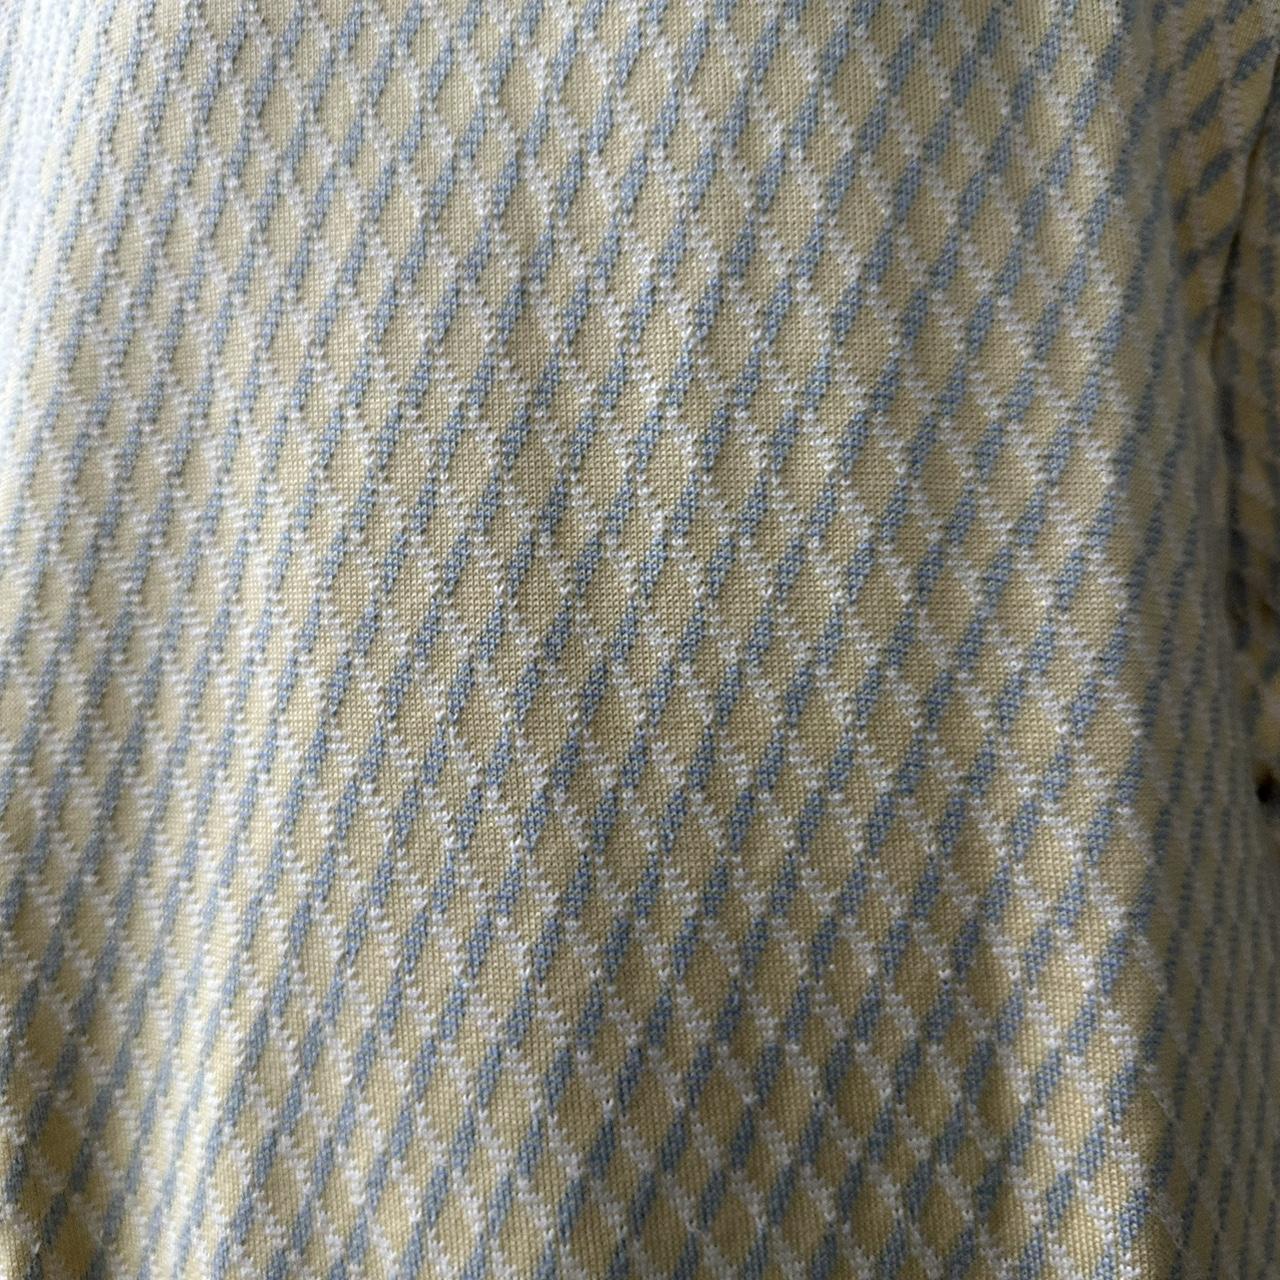 Women's Yellow and Blue Jumper